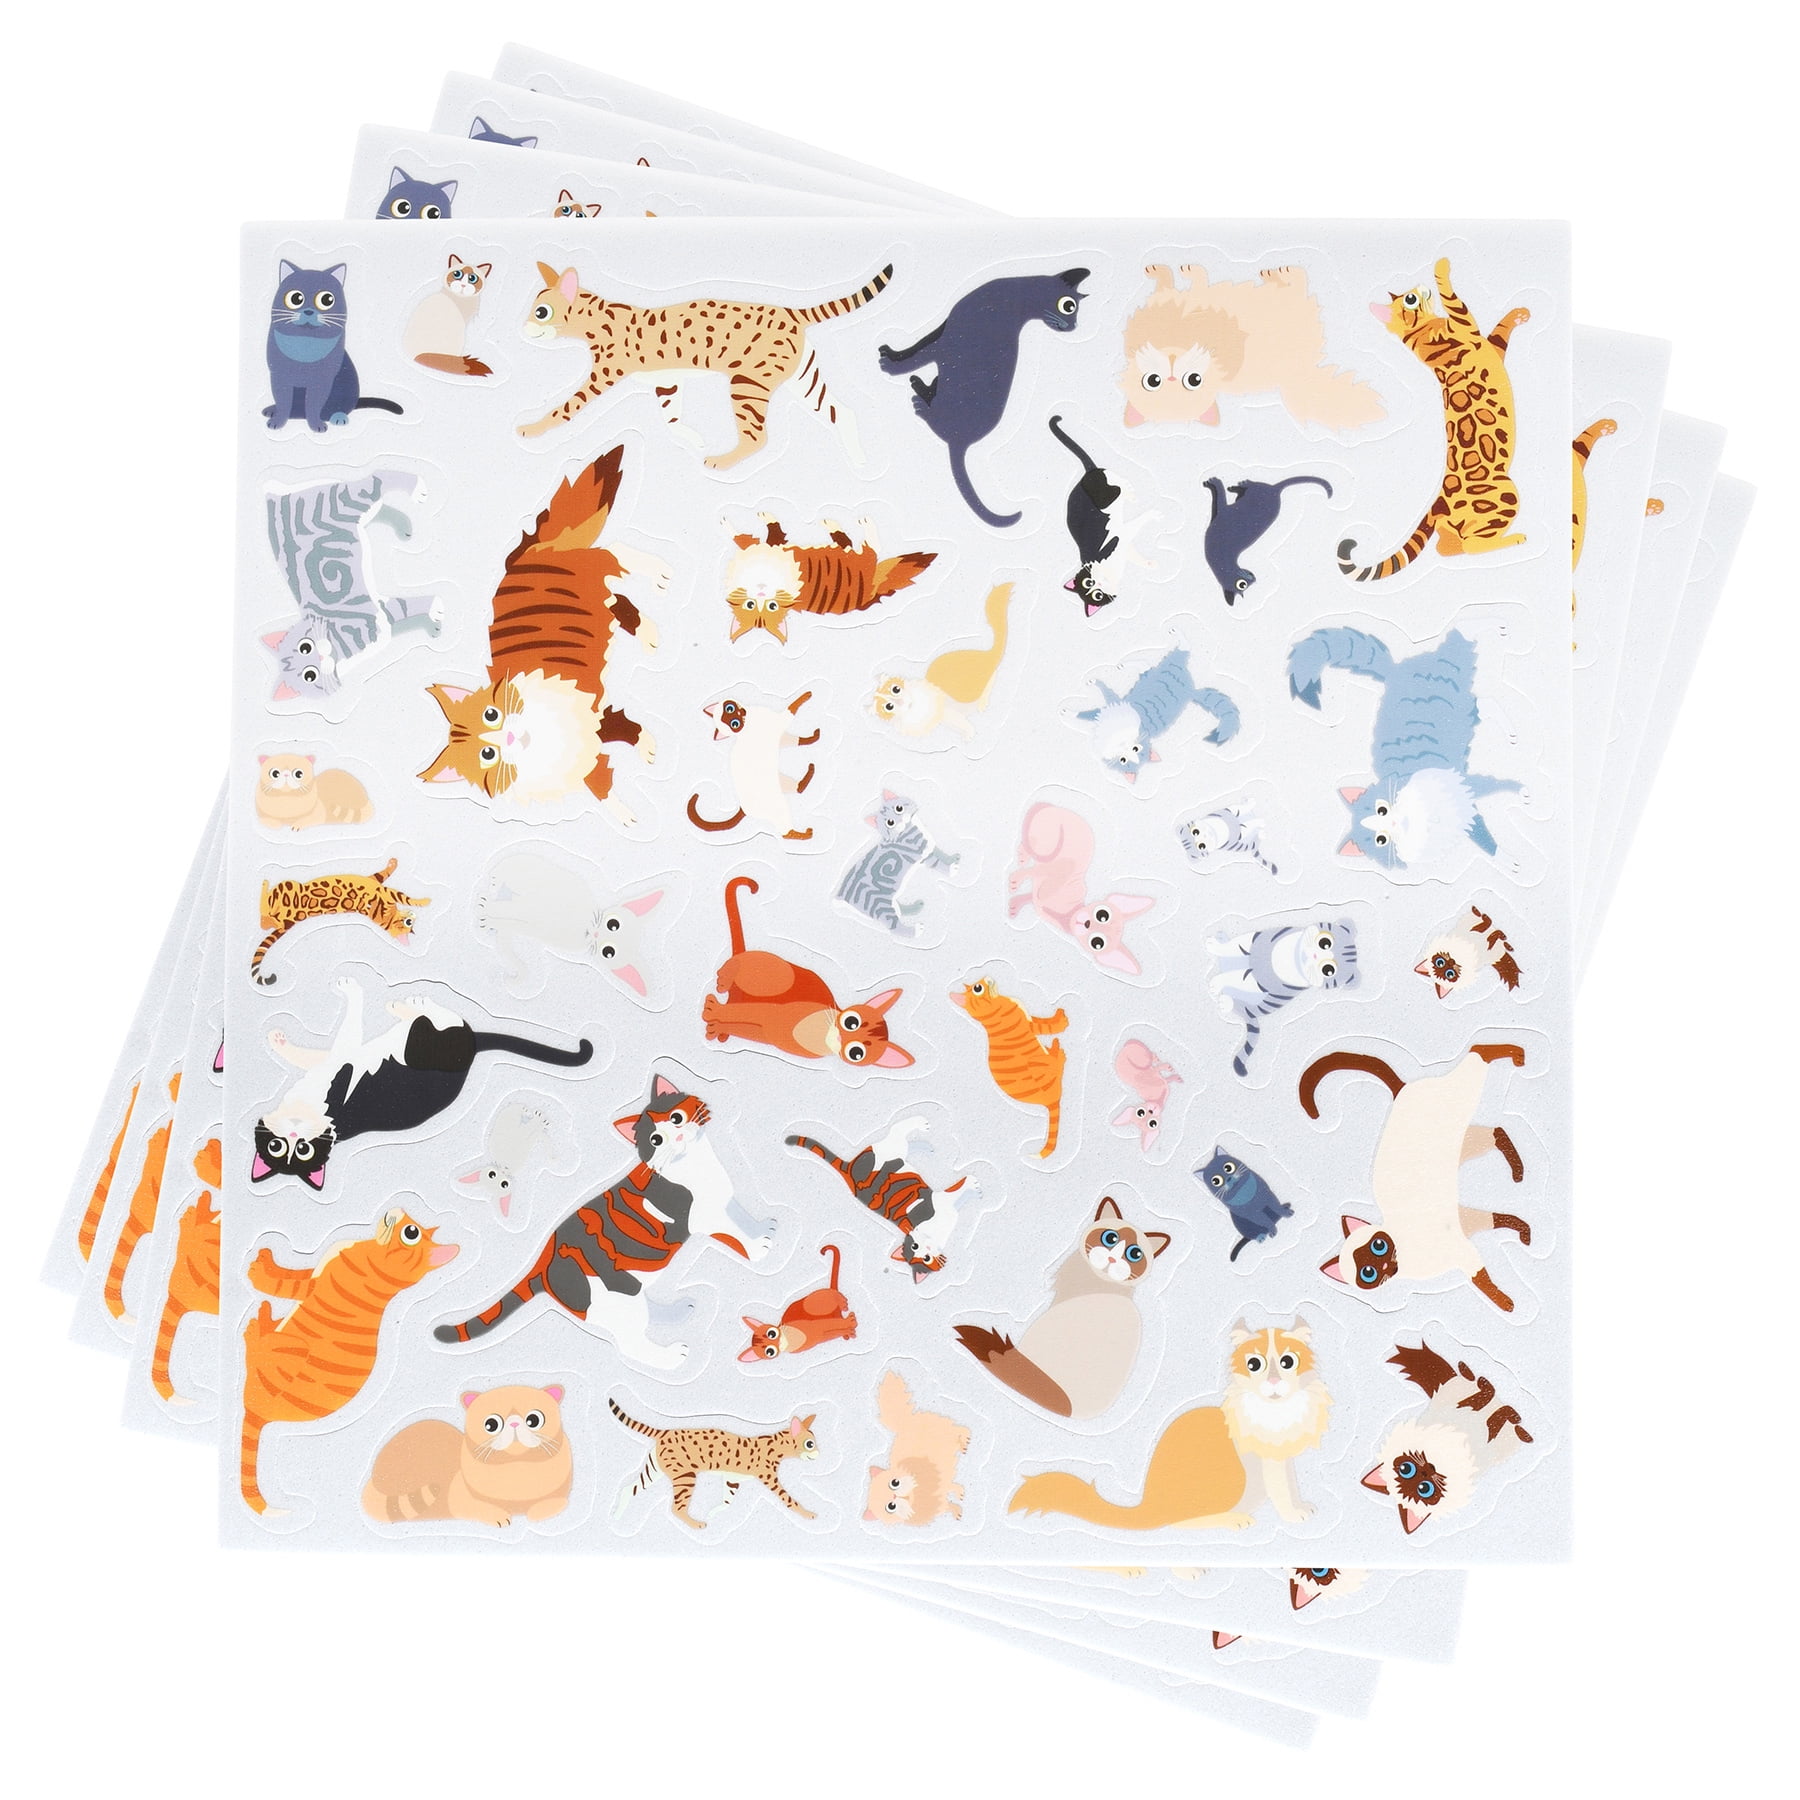 Ready 2 Learn™ Foam Stickers - Cats - 160 Per Pack - 3 Packs : Target